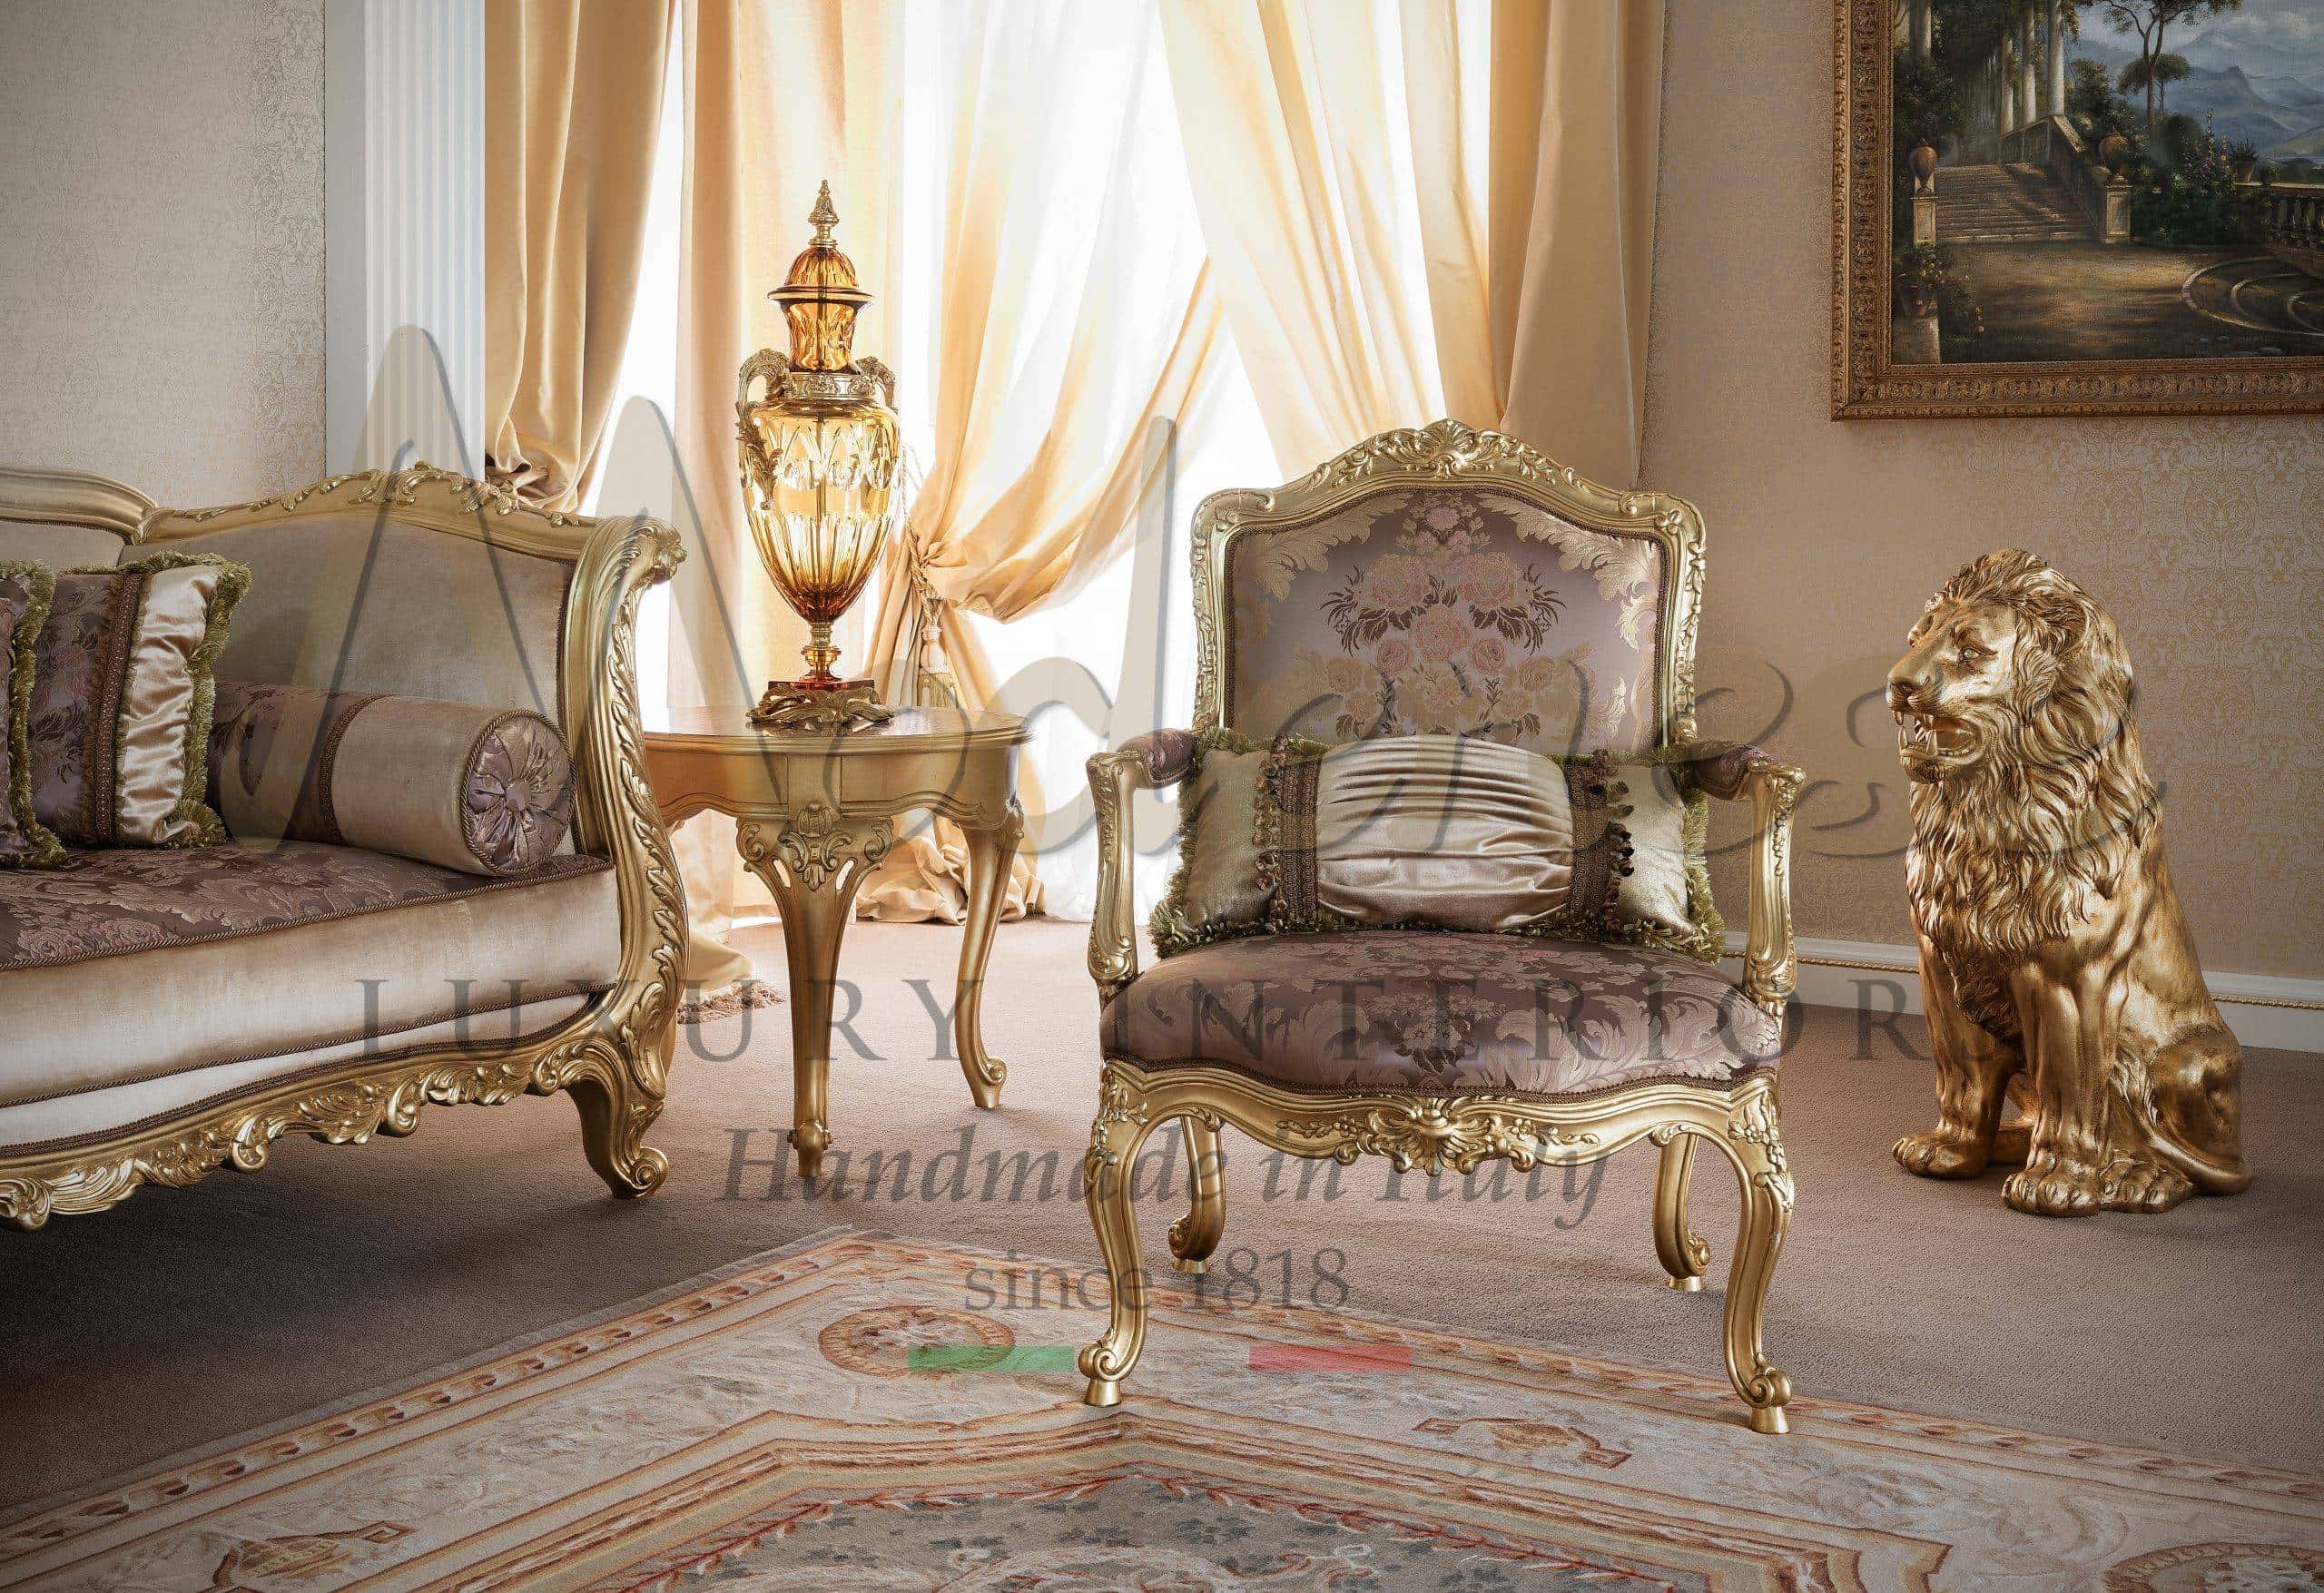 louis XV design furniture design baroque classic luxury project interior design service consult residential project furnishing decoration home villa palace french style custom-made handcrafted artisans craftsmanship